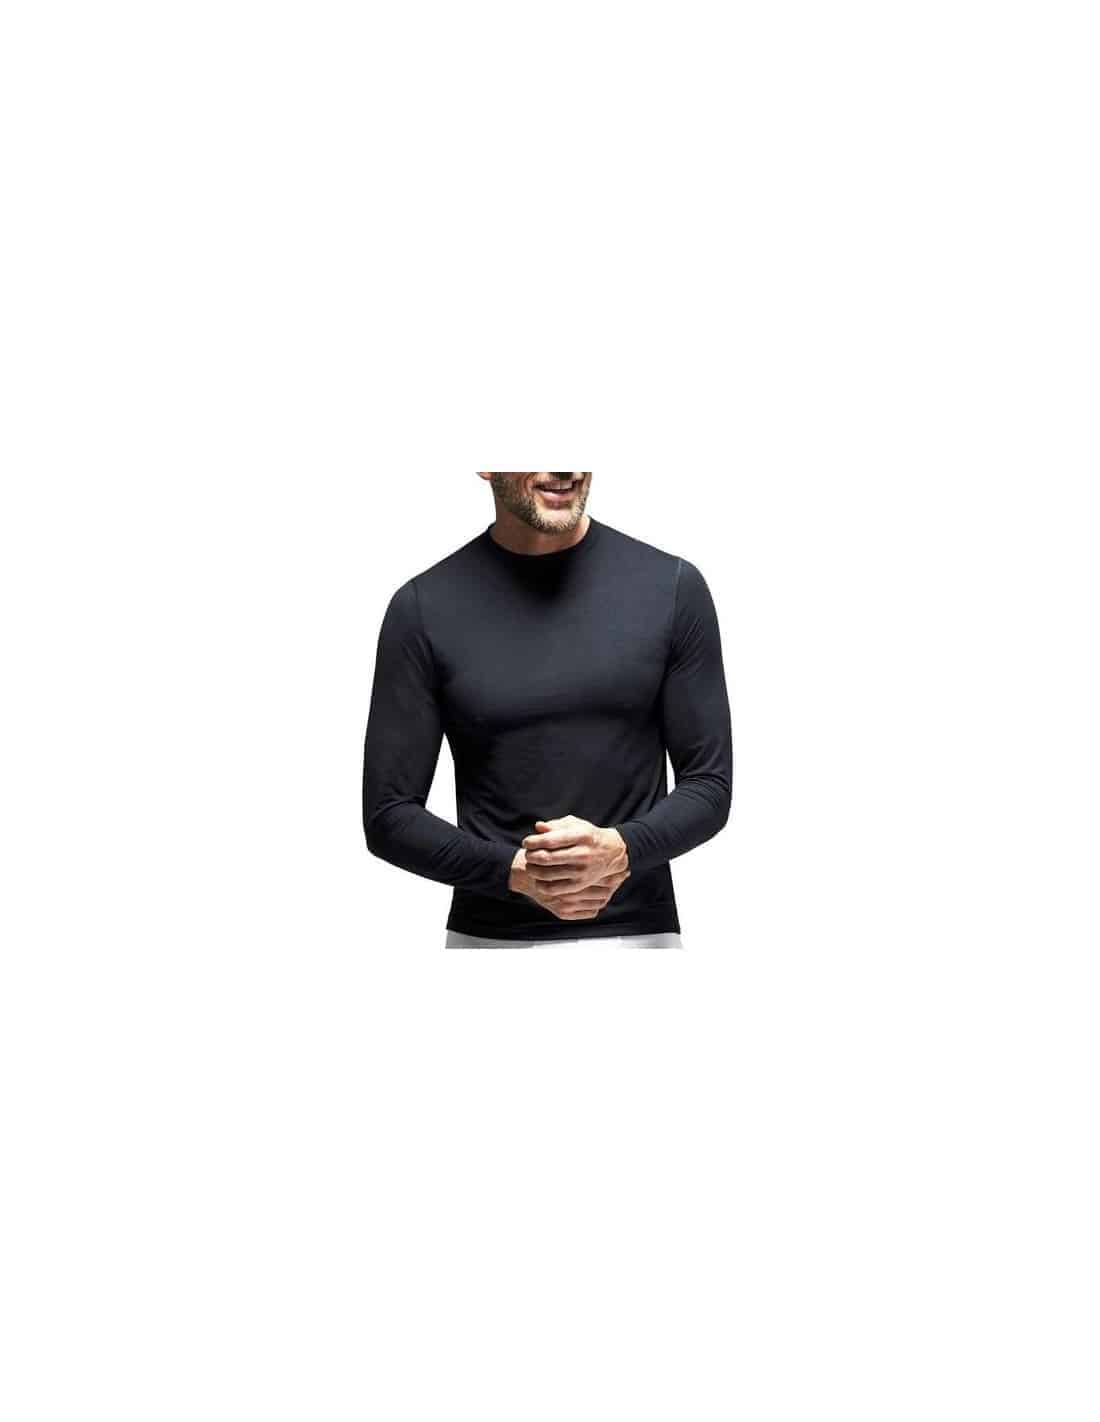 Maillot thermique homme Ultra Lite, Protection -15°C